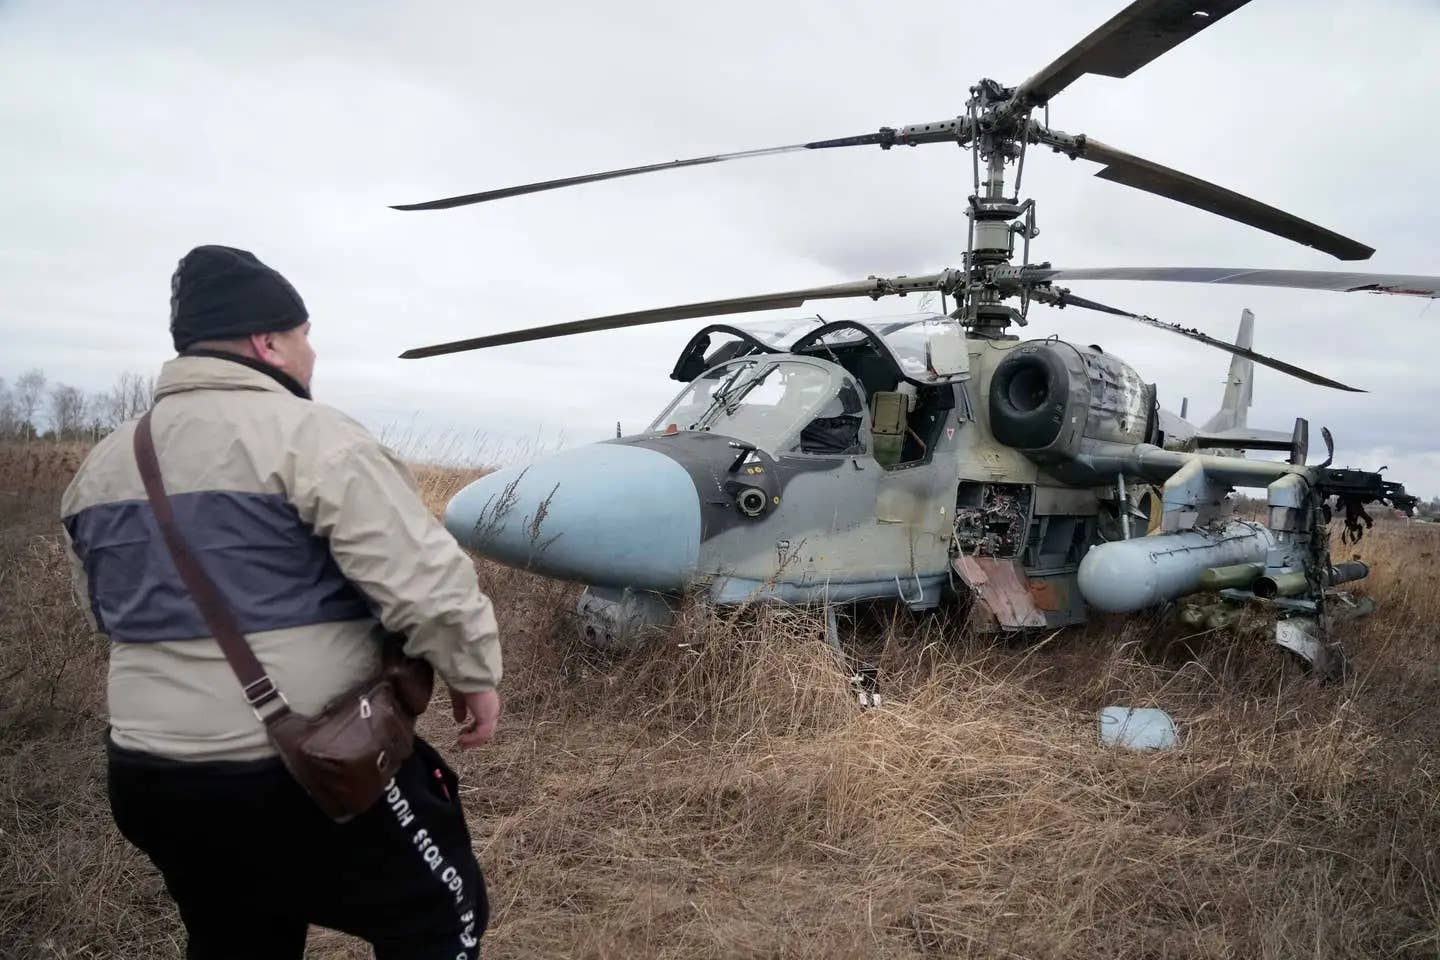 A man stands in front of a Ka-52 attack helicopter forced to land in a field outside Kyiv, Ukraine, on February 24, 2022. AP Photo/Efrem Lukatsky